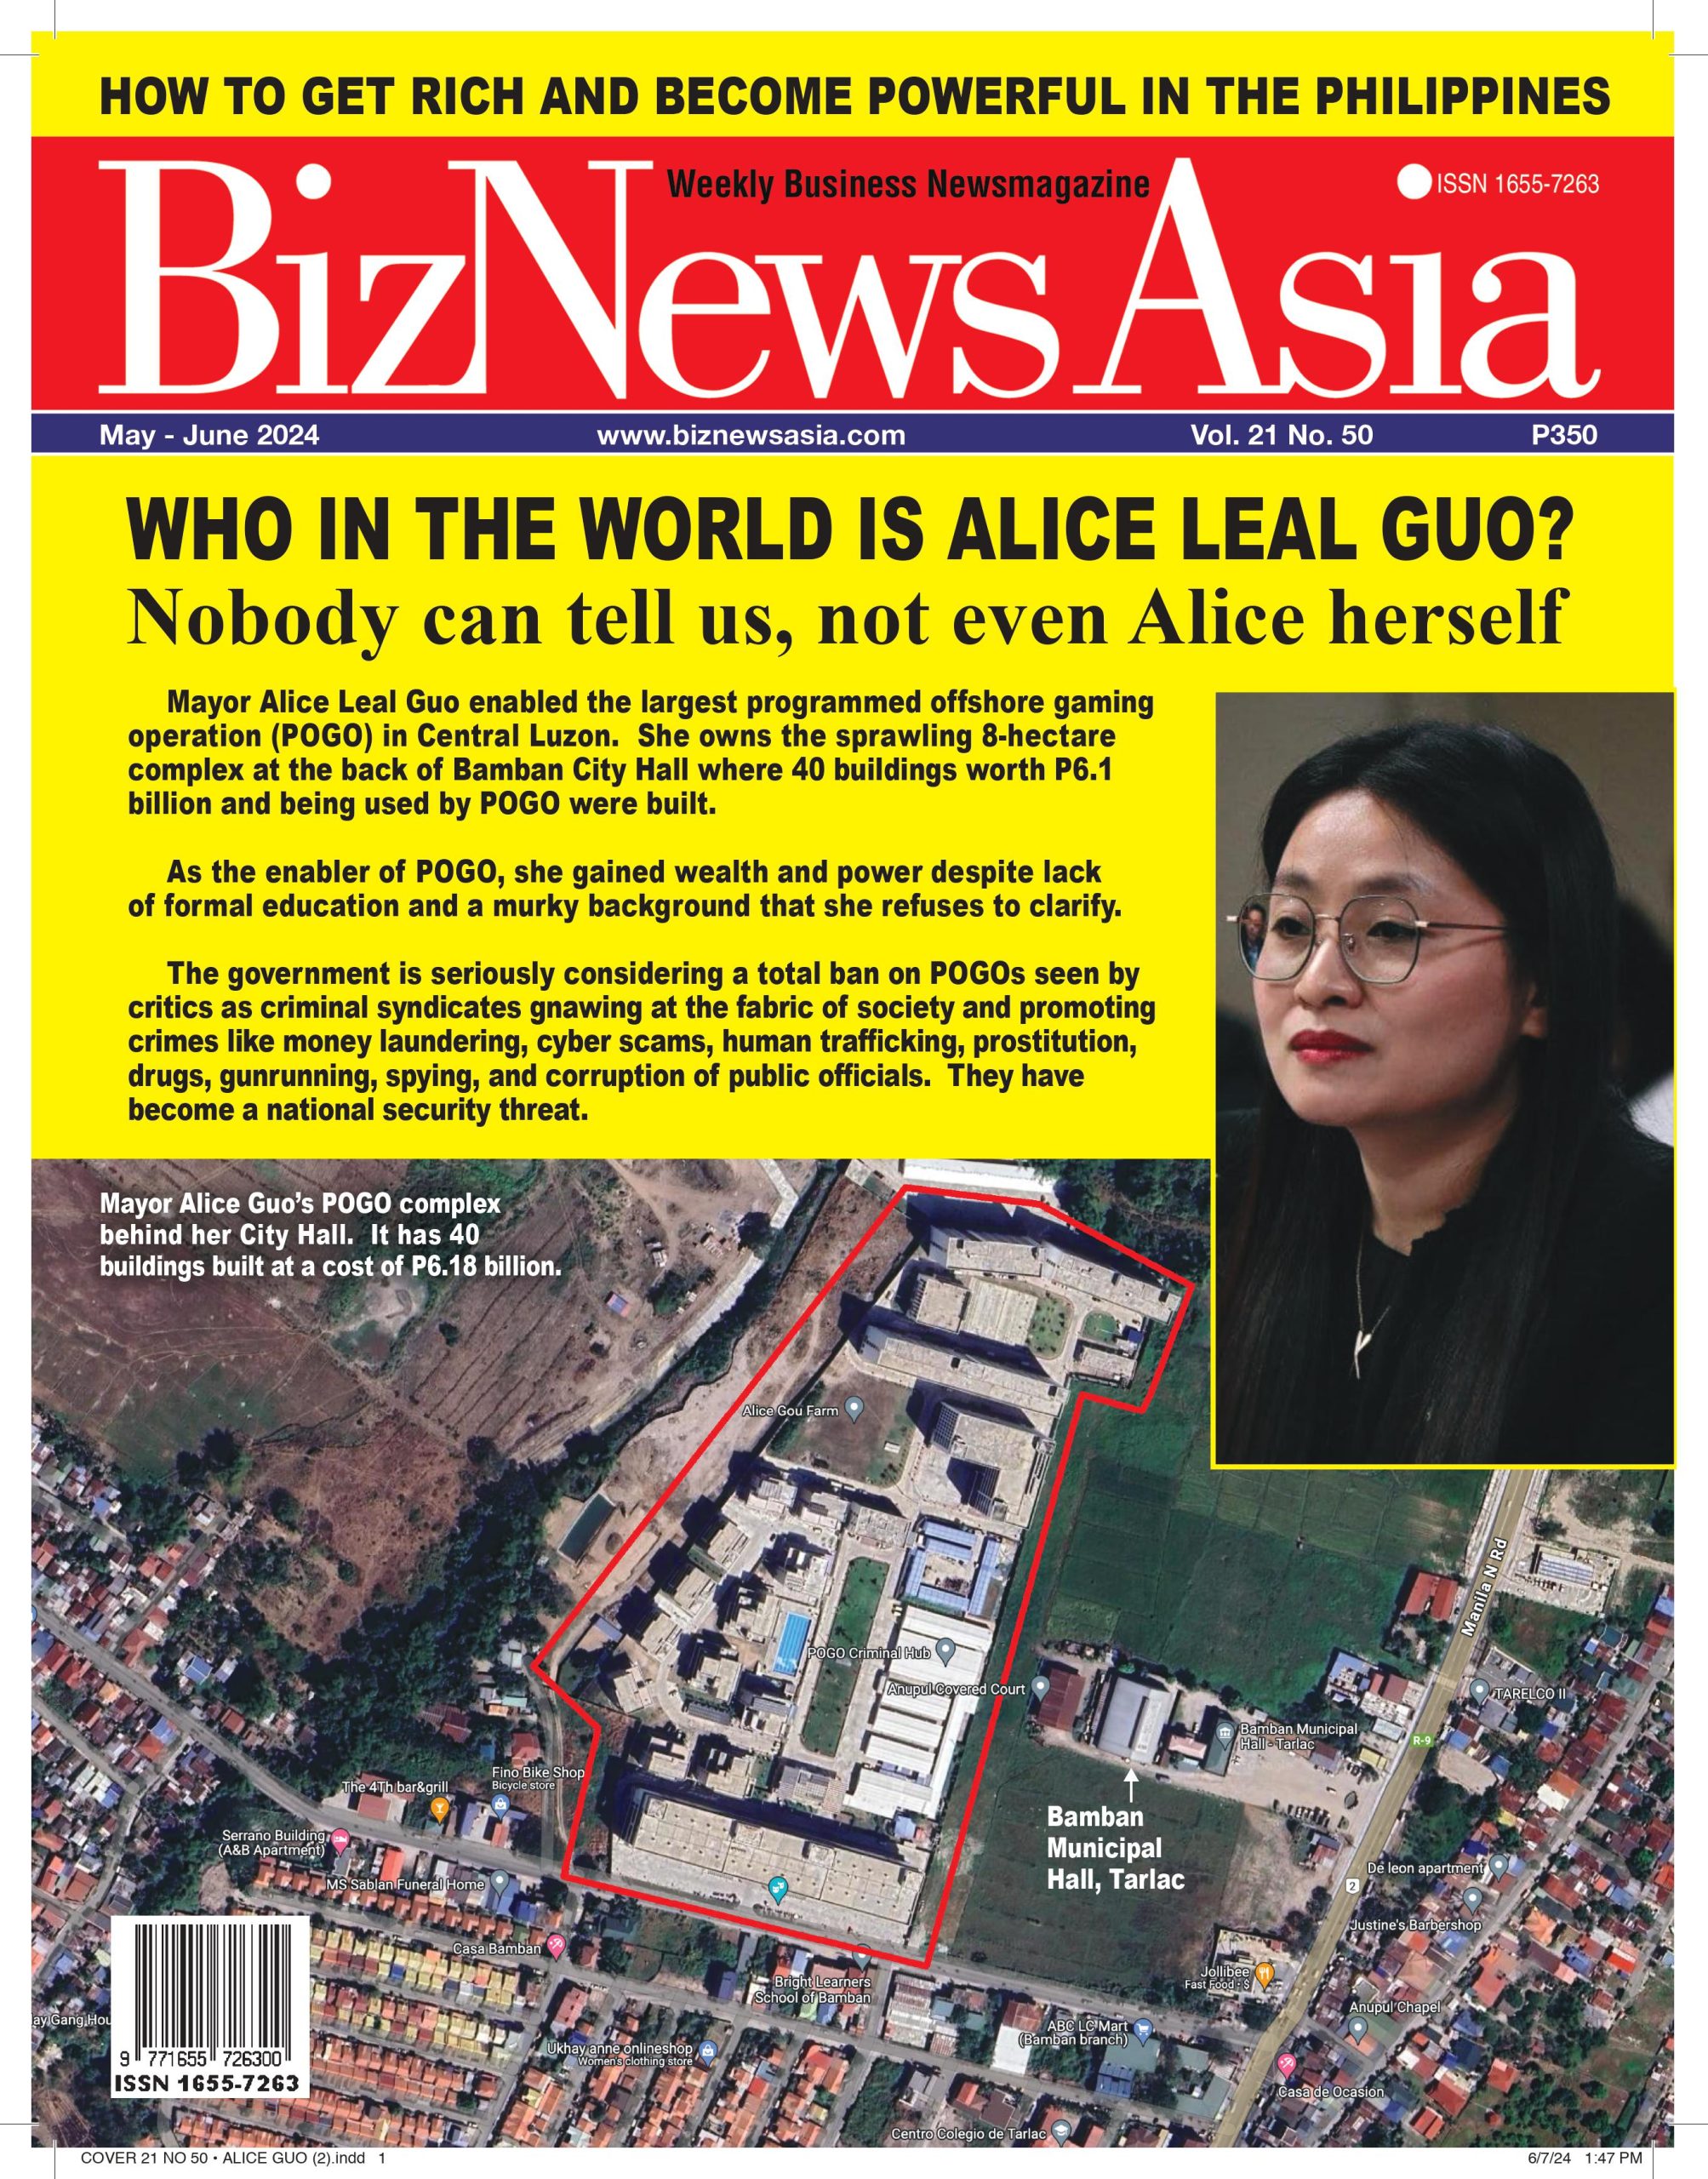 WHO IN THE WORLD IS ALICE LEAL GUO?